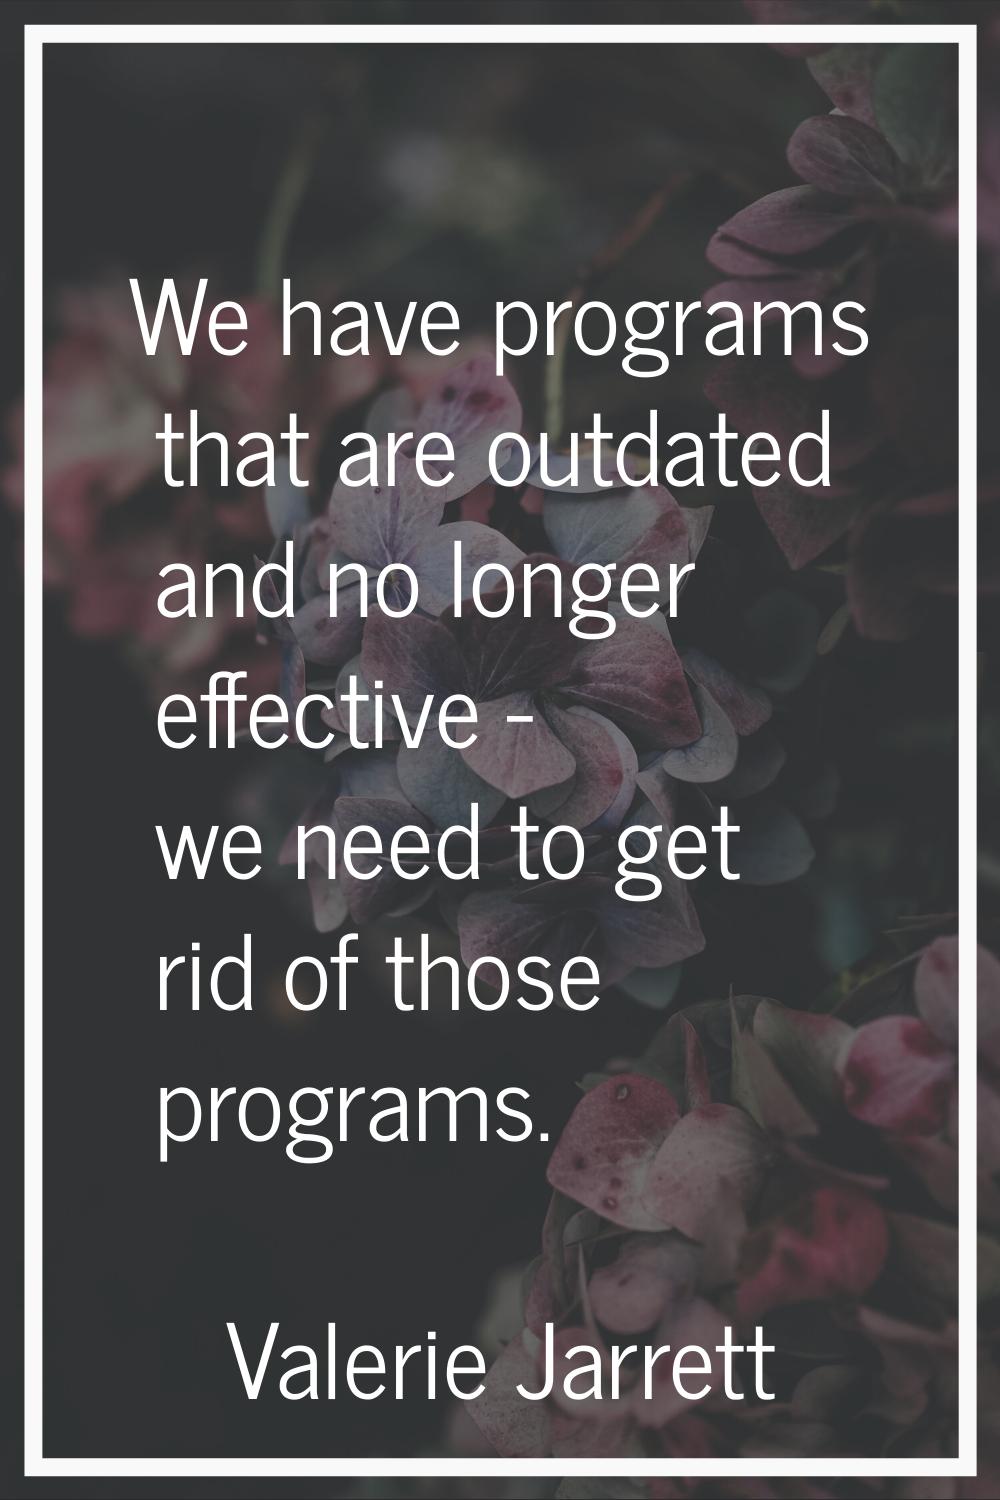 We have programs that are outdated and no longer effective - we need to get rid of those programs.